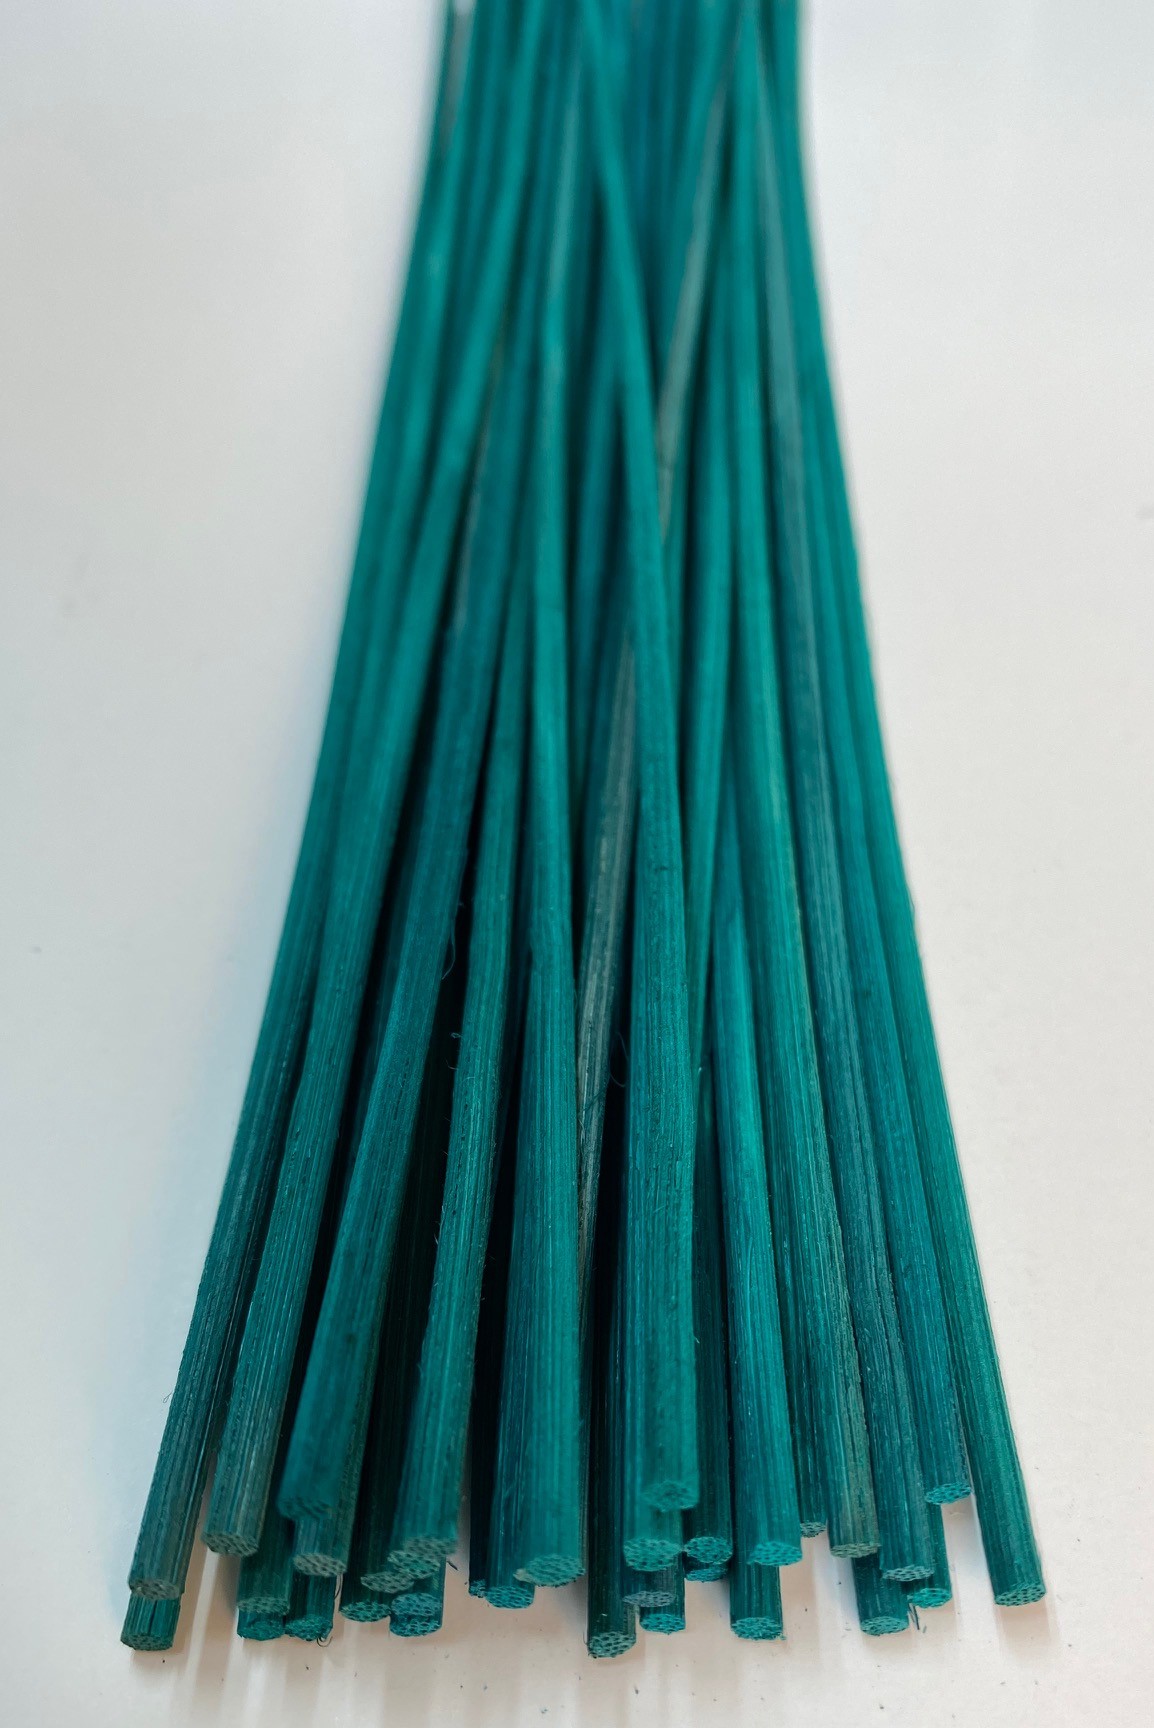 72 Pack of Green Reed Diffuser Reeds